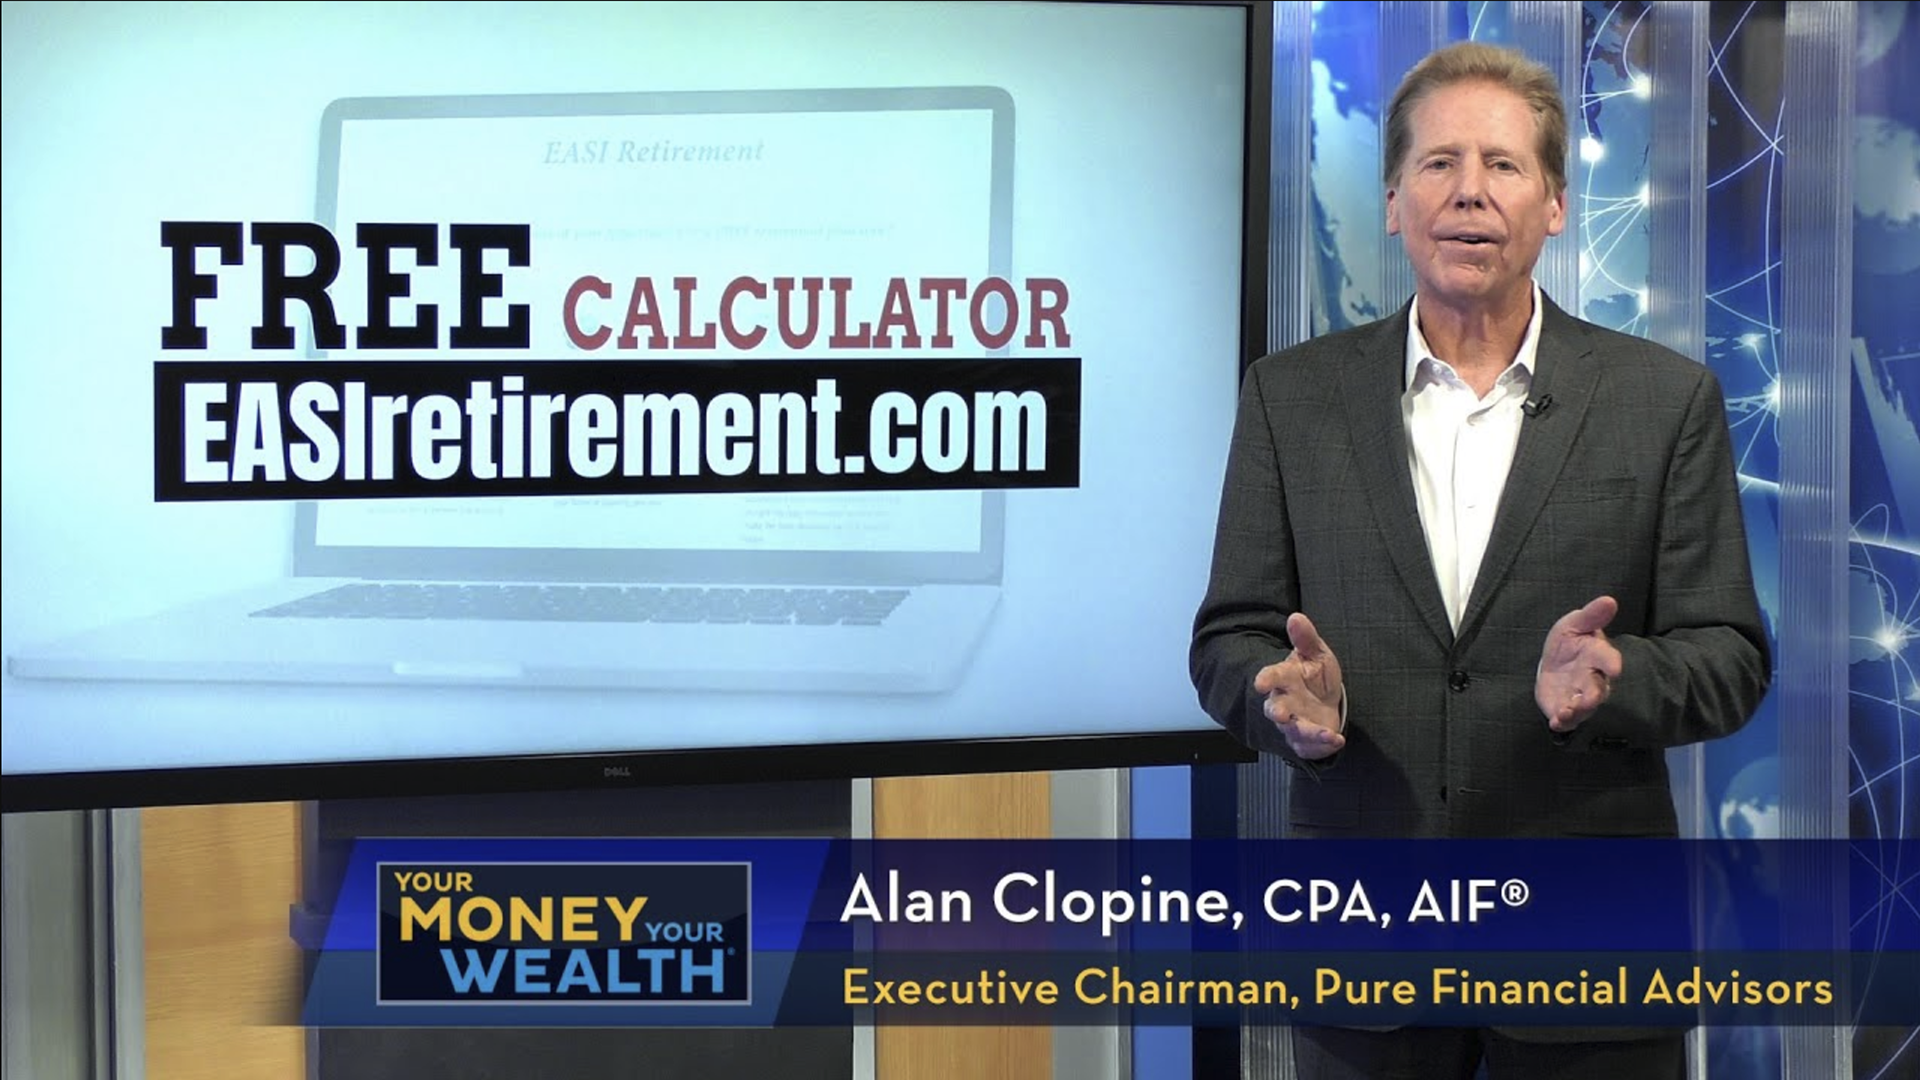 EASI Retirement Spitball Analysis Free Retirement Calculator - Your Money, Your Wealth® TV - S9 | E12